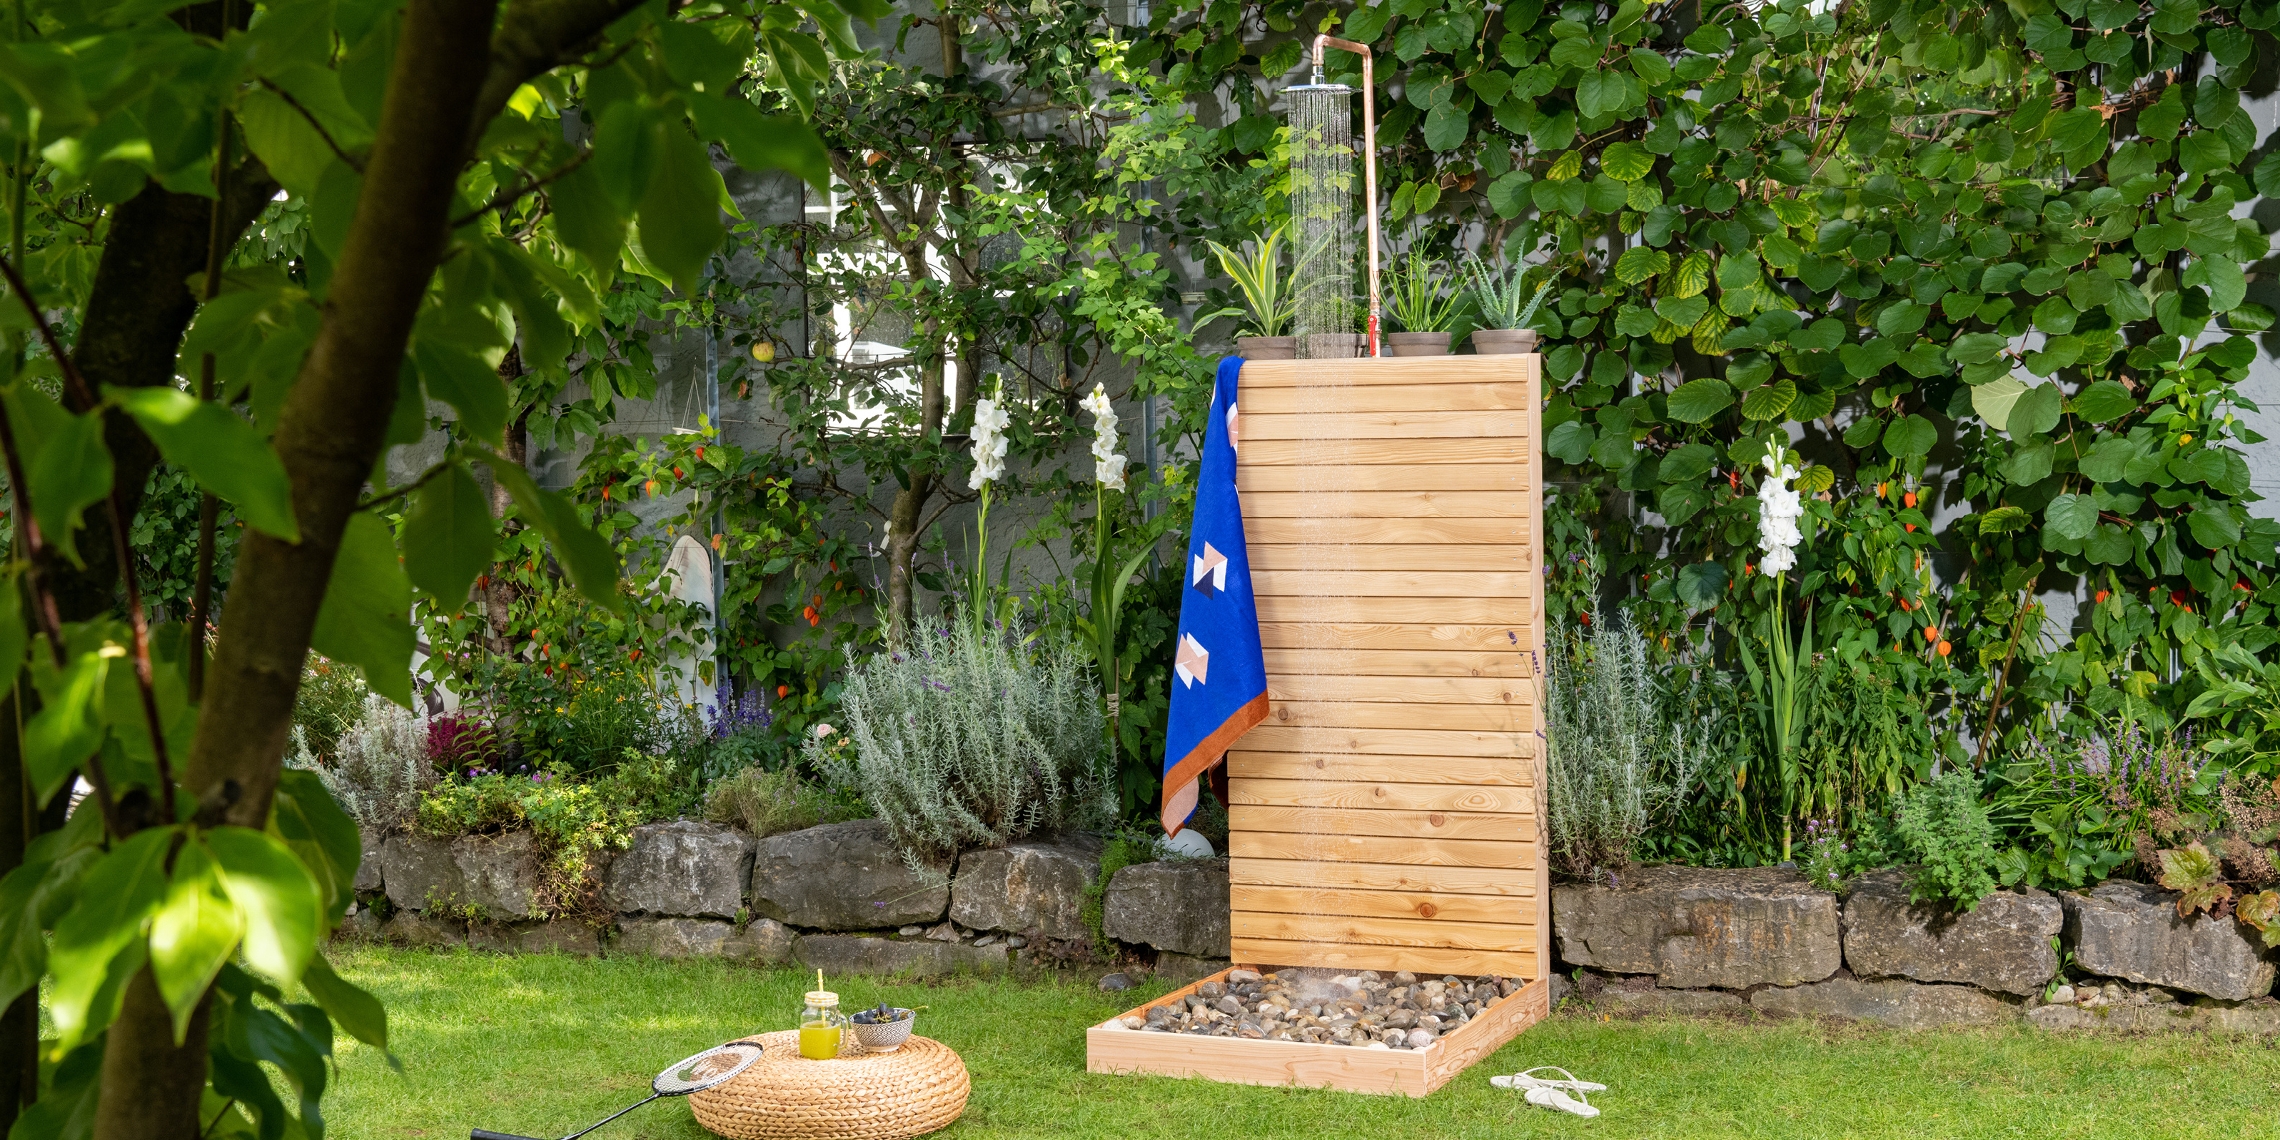 Do-it-yourself shower for the garden: You're sure to feel 